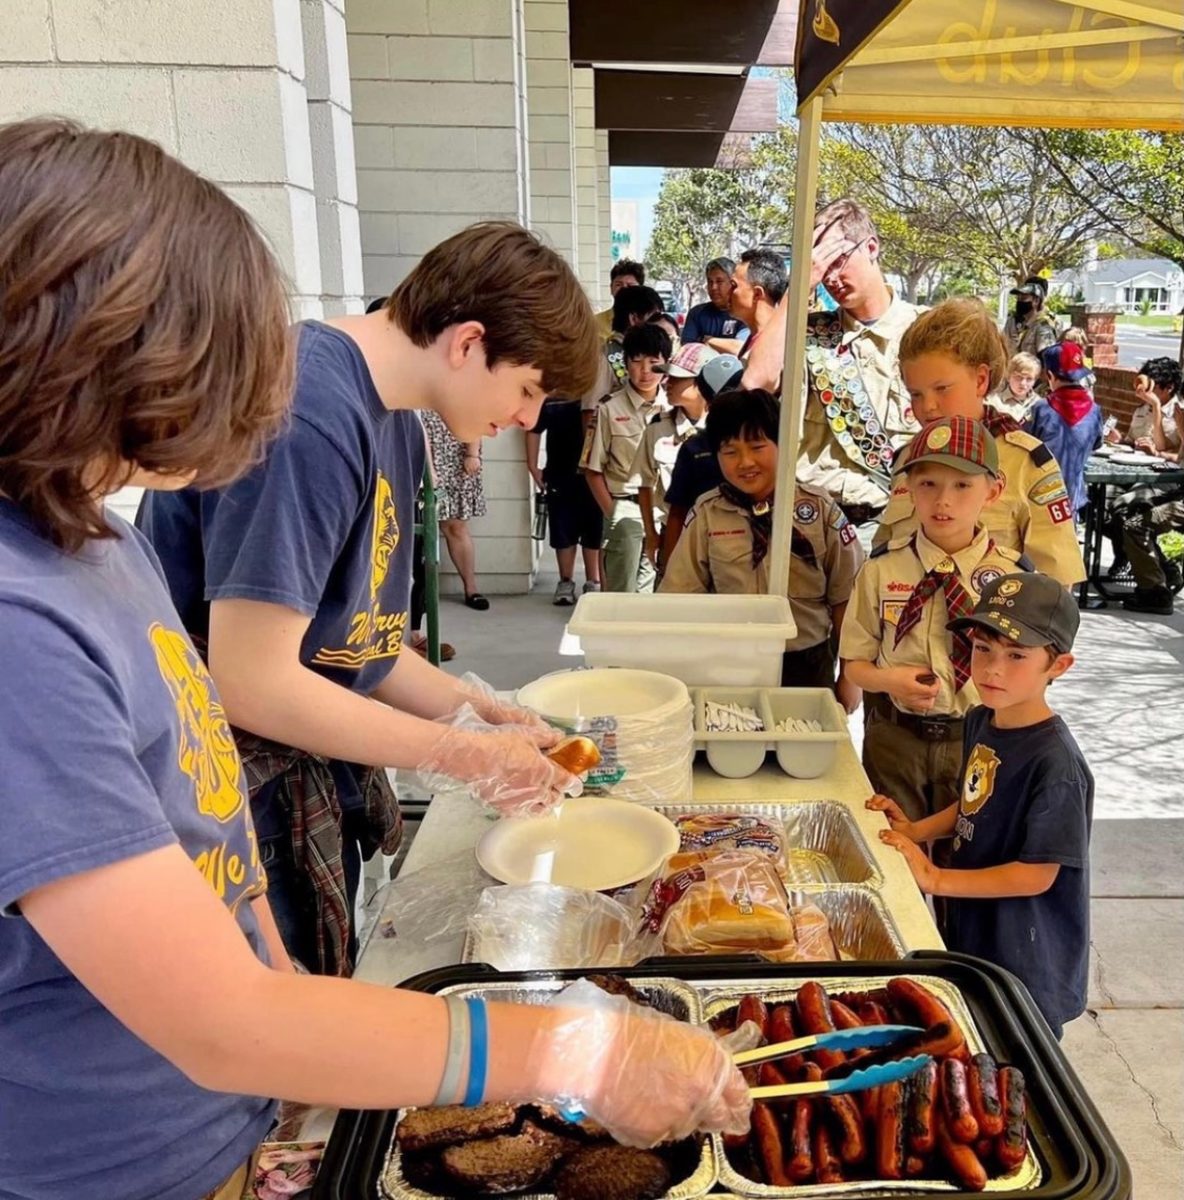 Leos club members cook and serve hot dogs to Cub Scouts at a volunteering event.